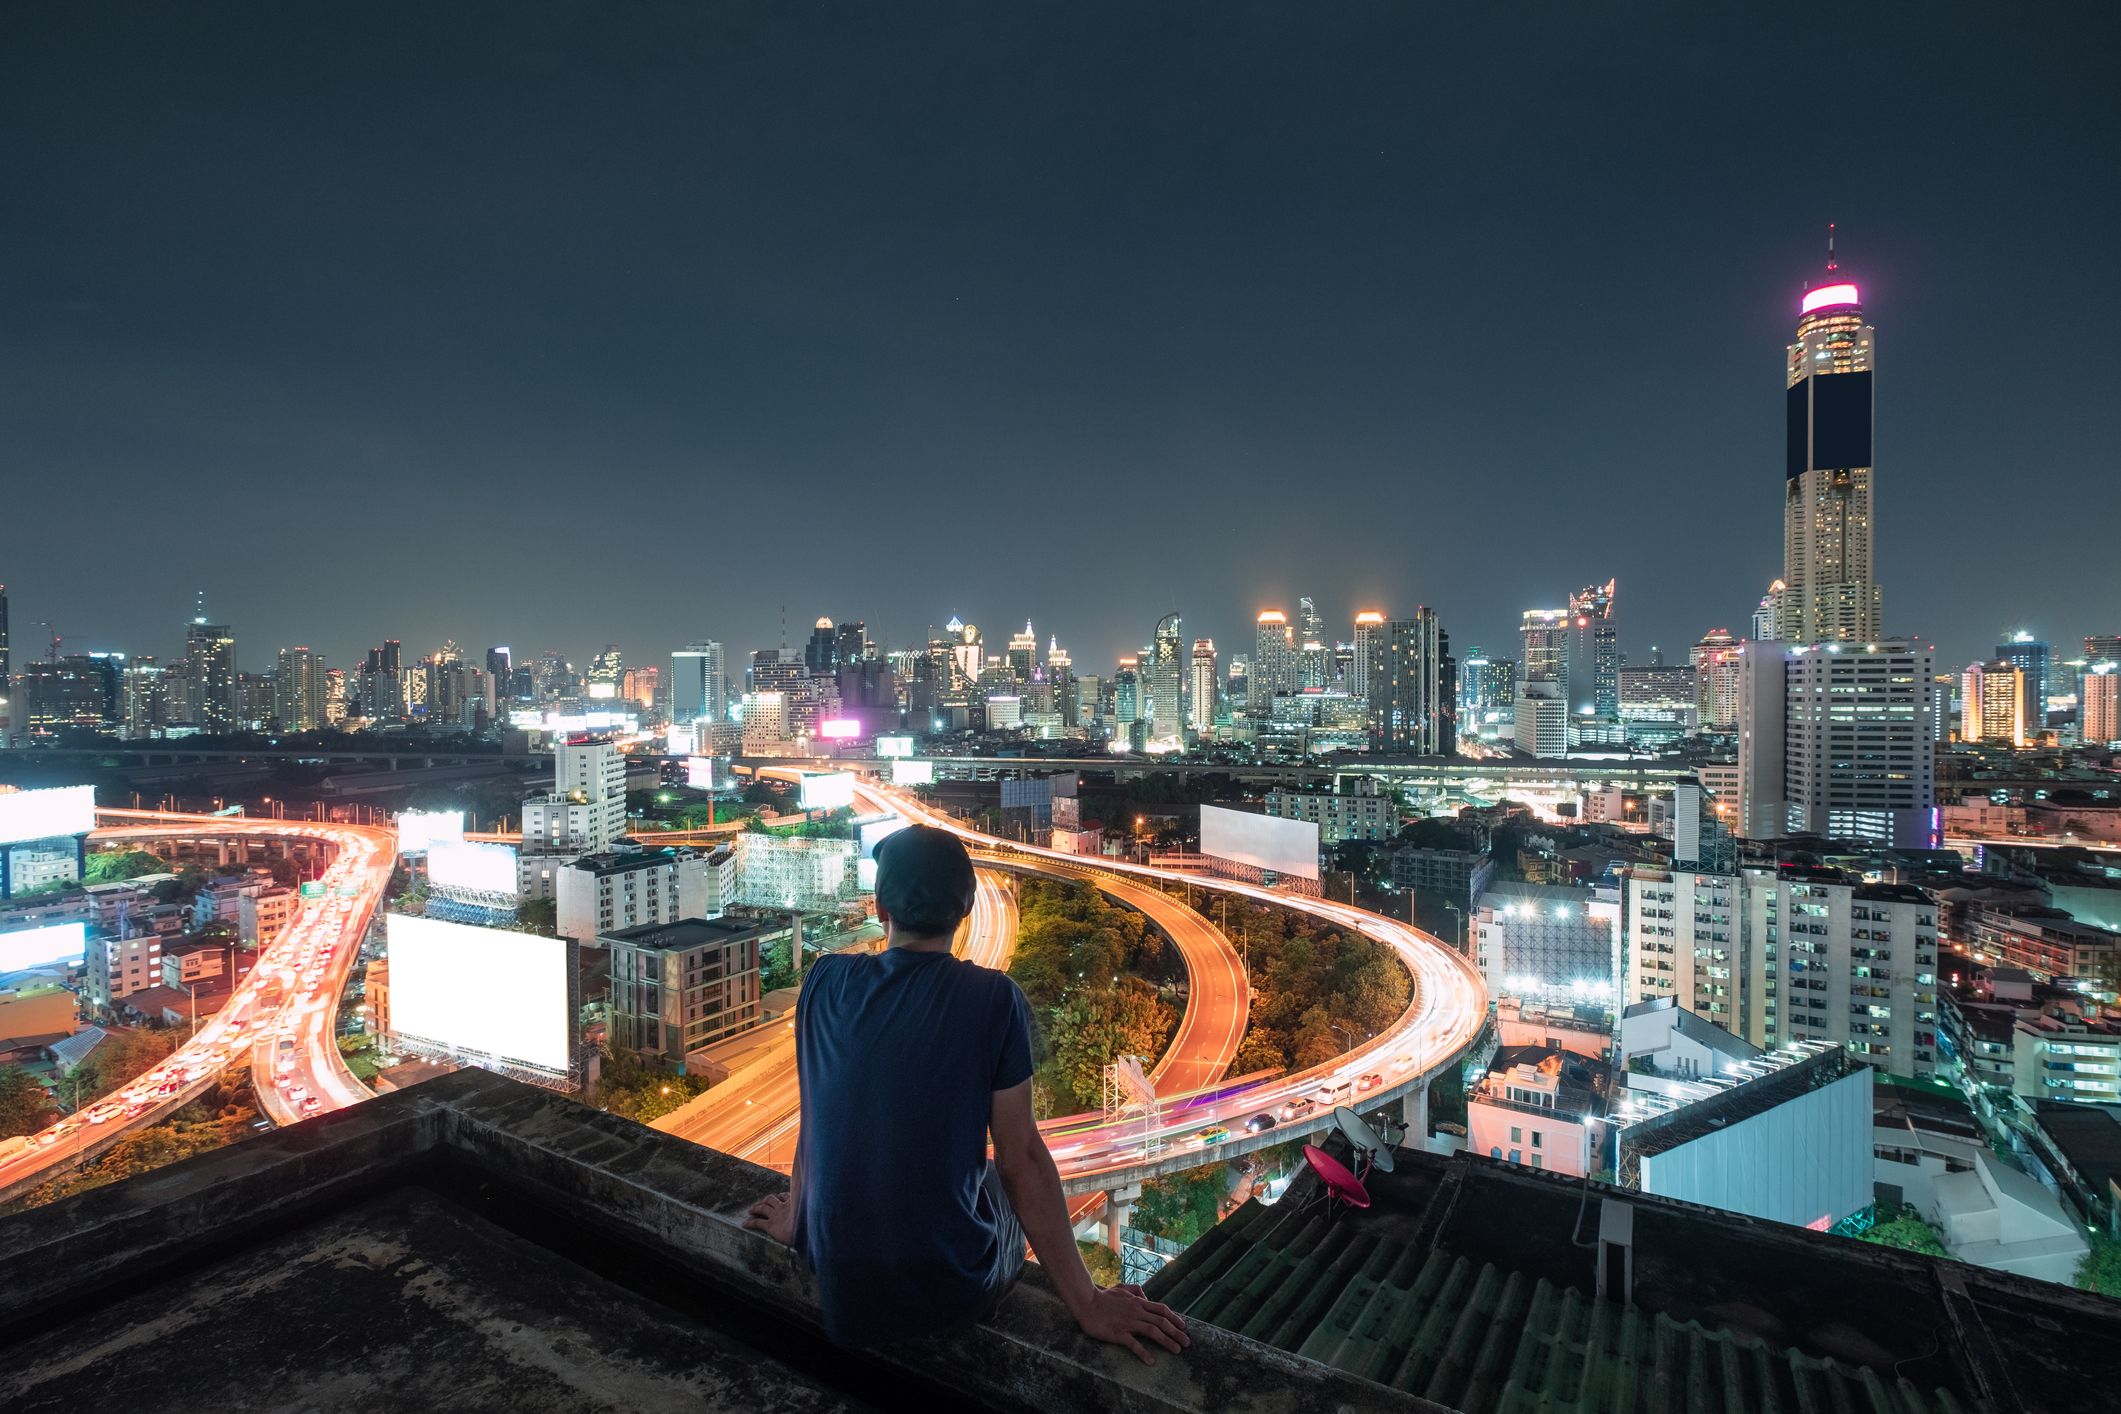 Men are sitting on balcony with sightseeing the city glowing at night